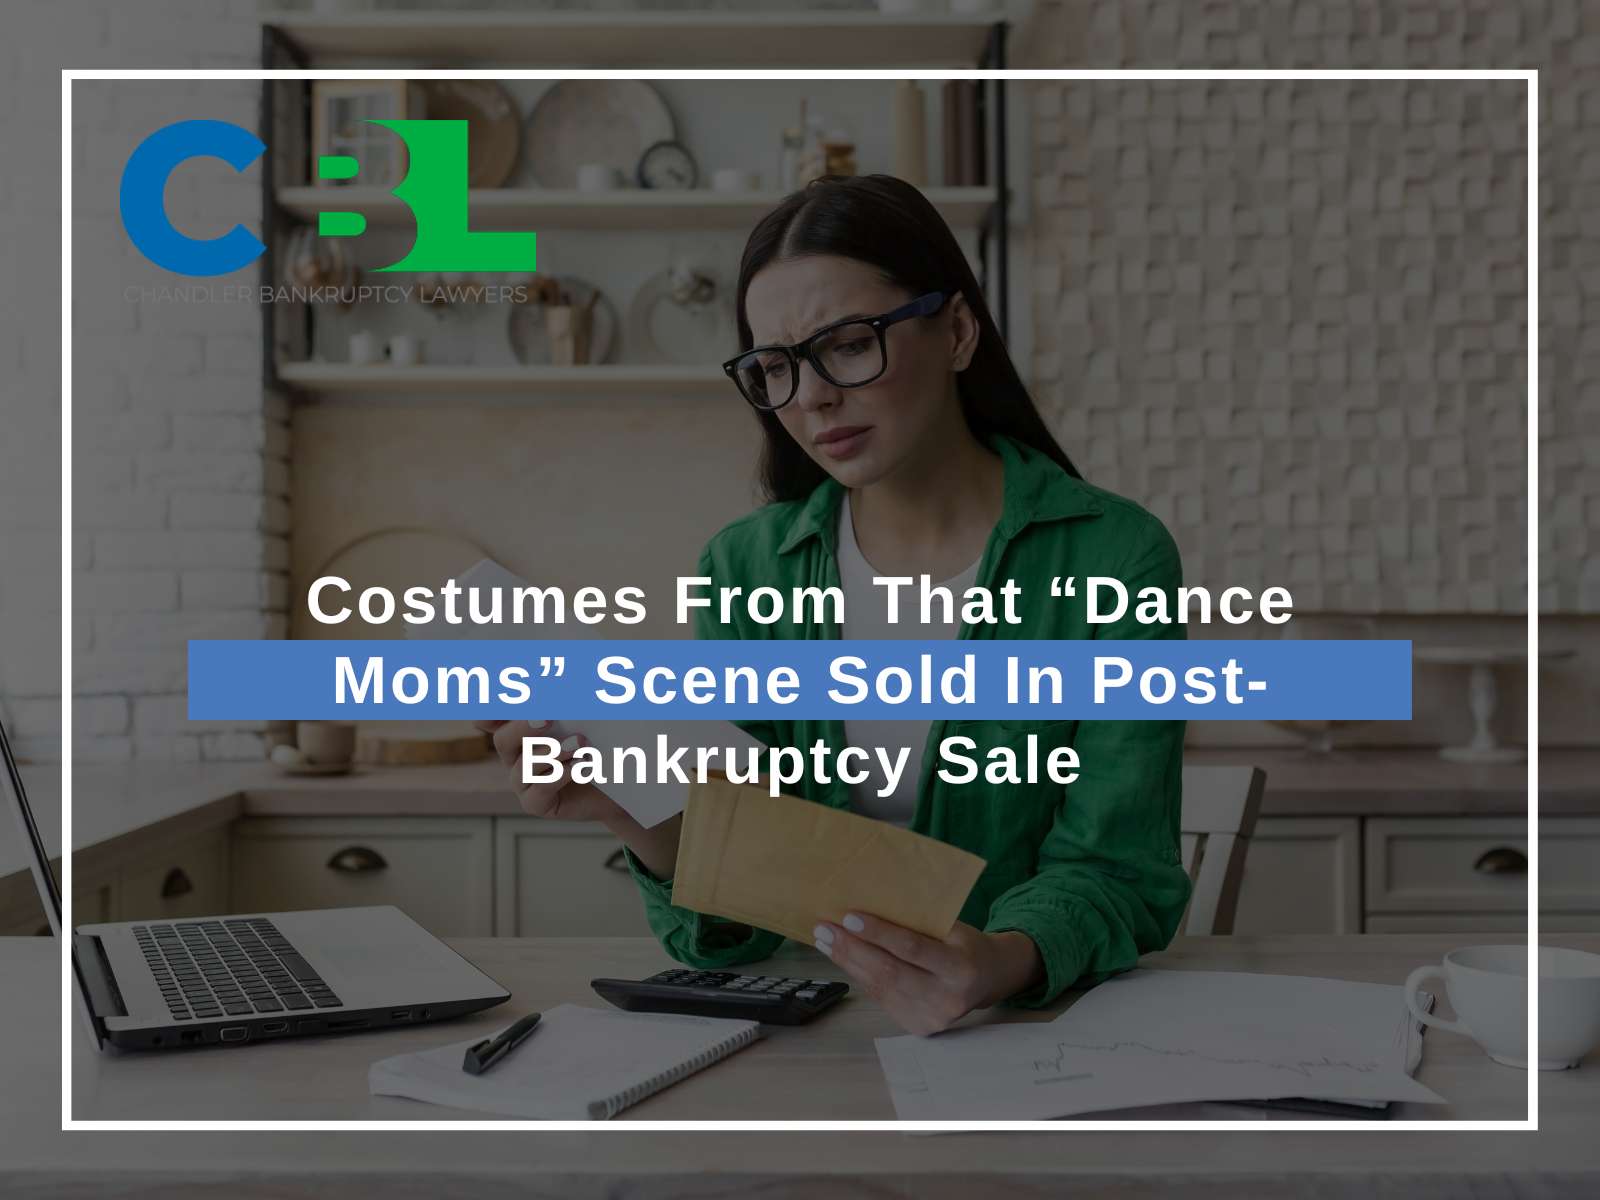 Costumes From That “Dance Moms” Scene Sold In Post-Bankruptcy Sale